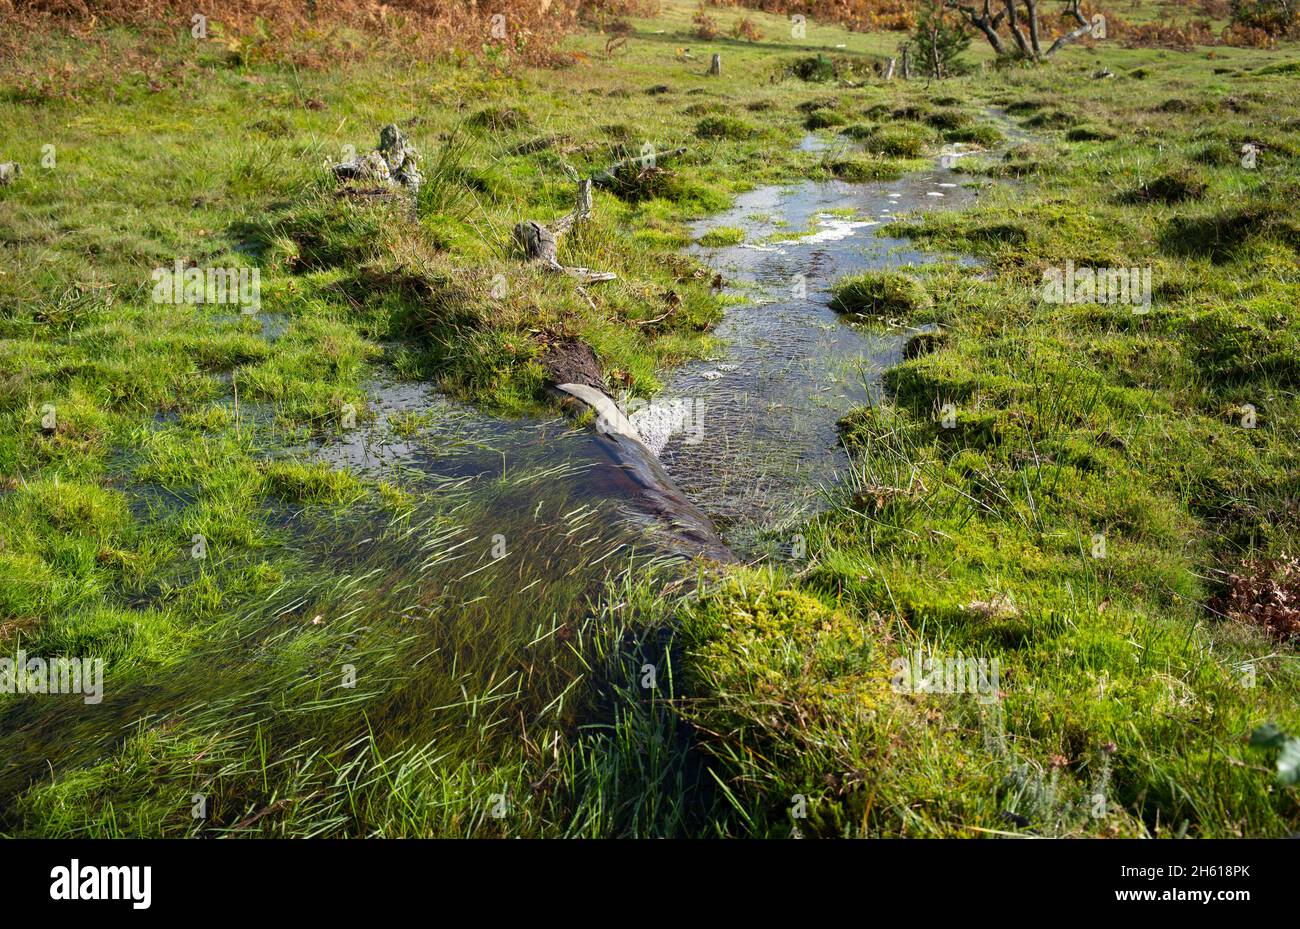 Conservation work to form natural streams within The New Forest Hampshire UK, heathland mires and wet grasslands helps wildlife and biodiversity. Stock Photo